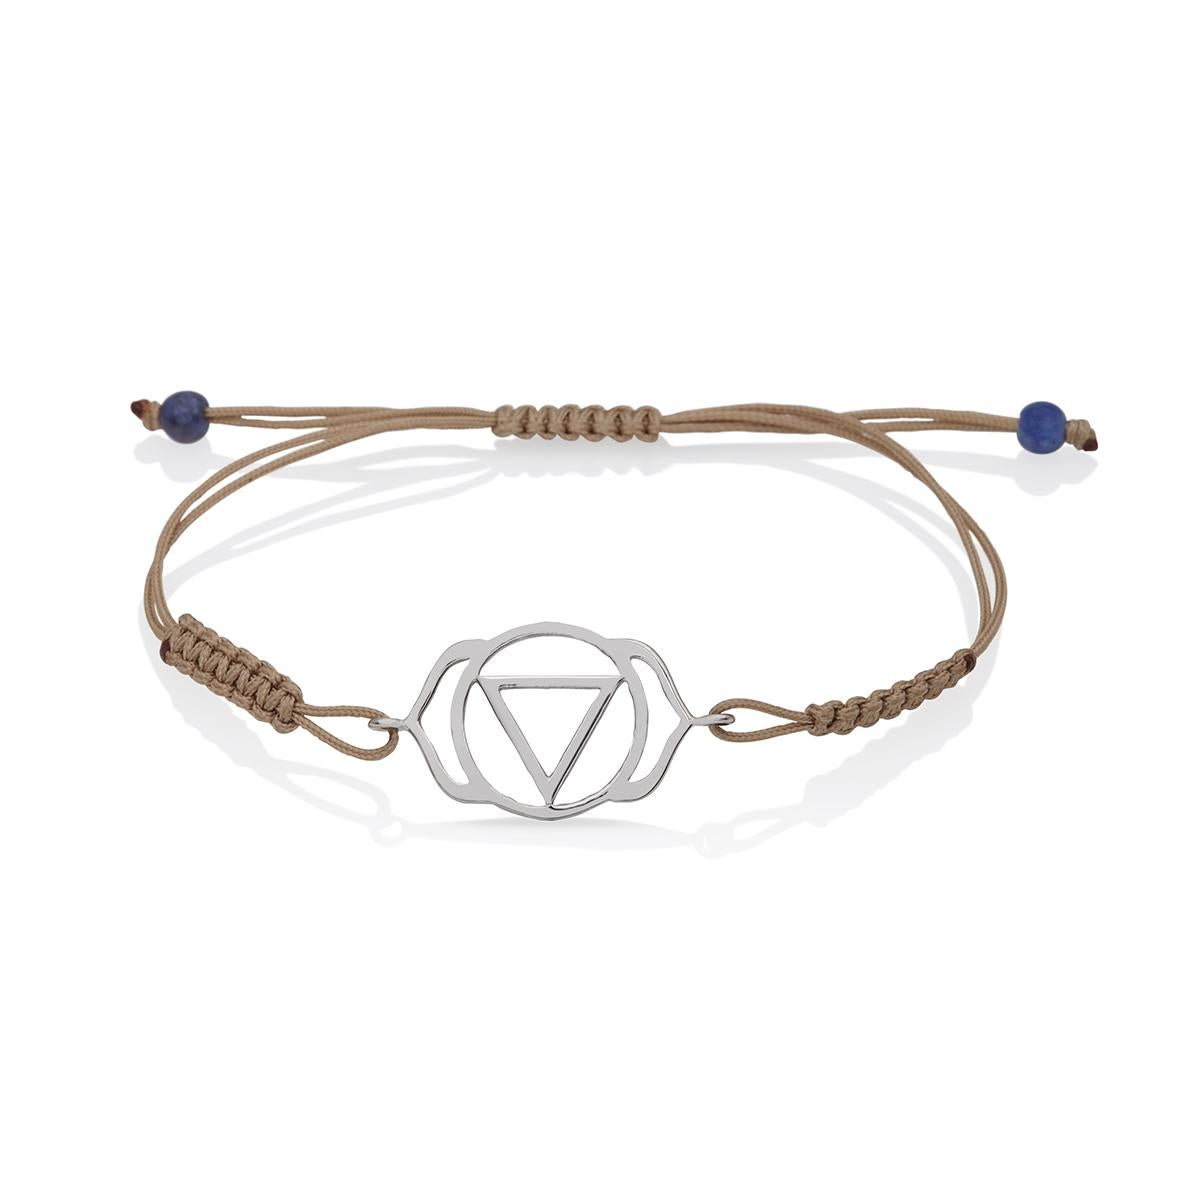 Macrame yoga Bracelet with Ajna - Third Eye -Chakra in 14 Kt white Gold with Brown Cord Gift for Her
A very beautiful and wearable macrame bracelet made of 14Kt Gold with the Ajna Chakra. It will match with everything in your closet. Designed by